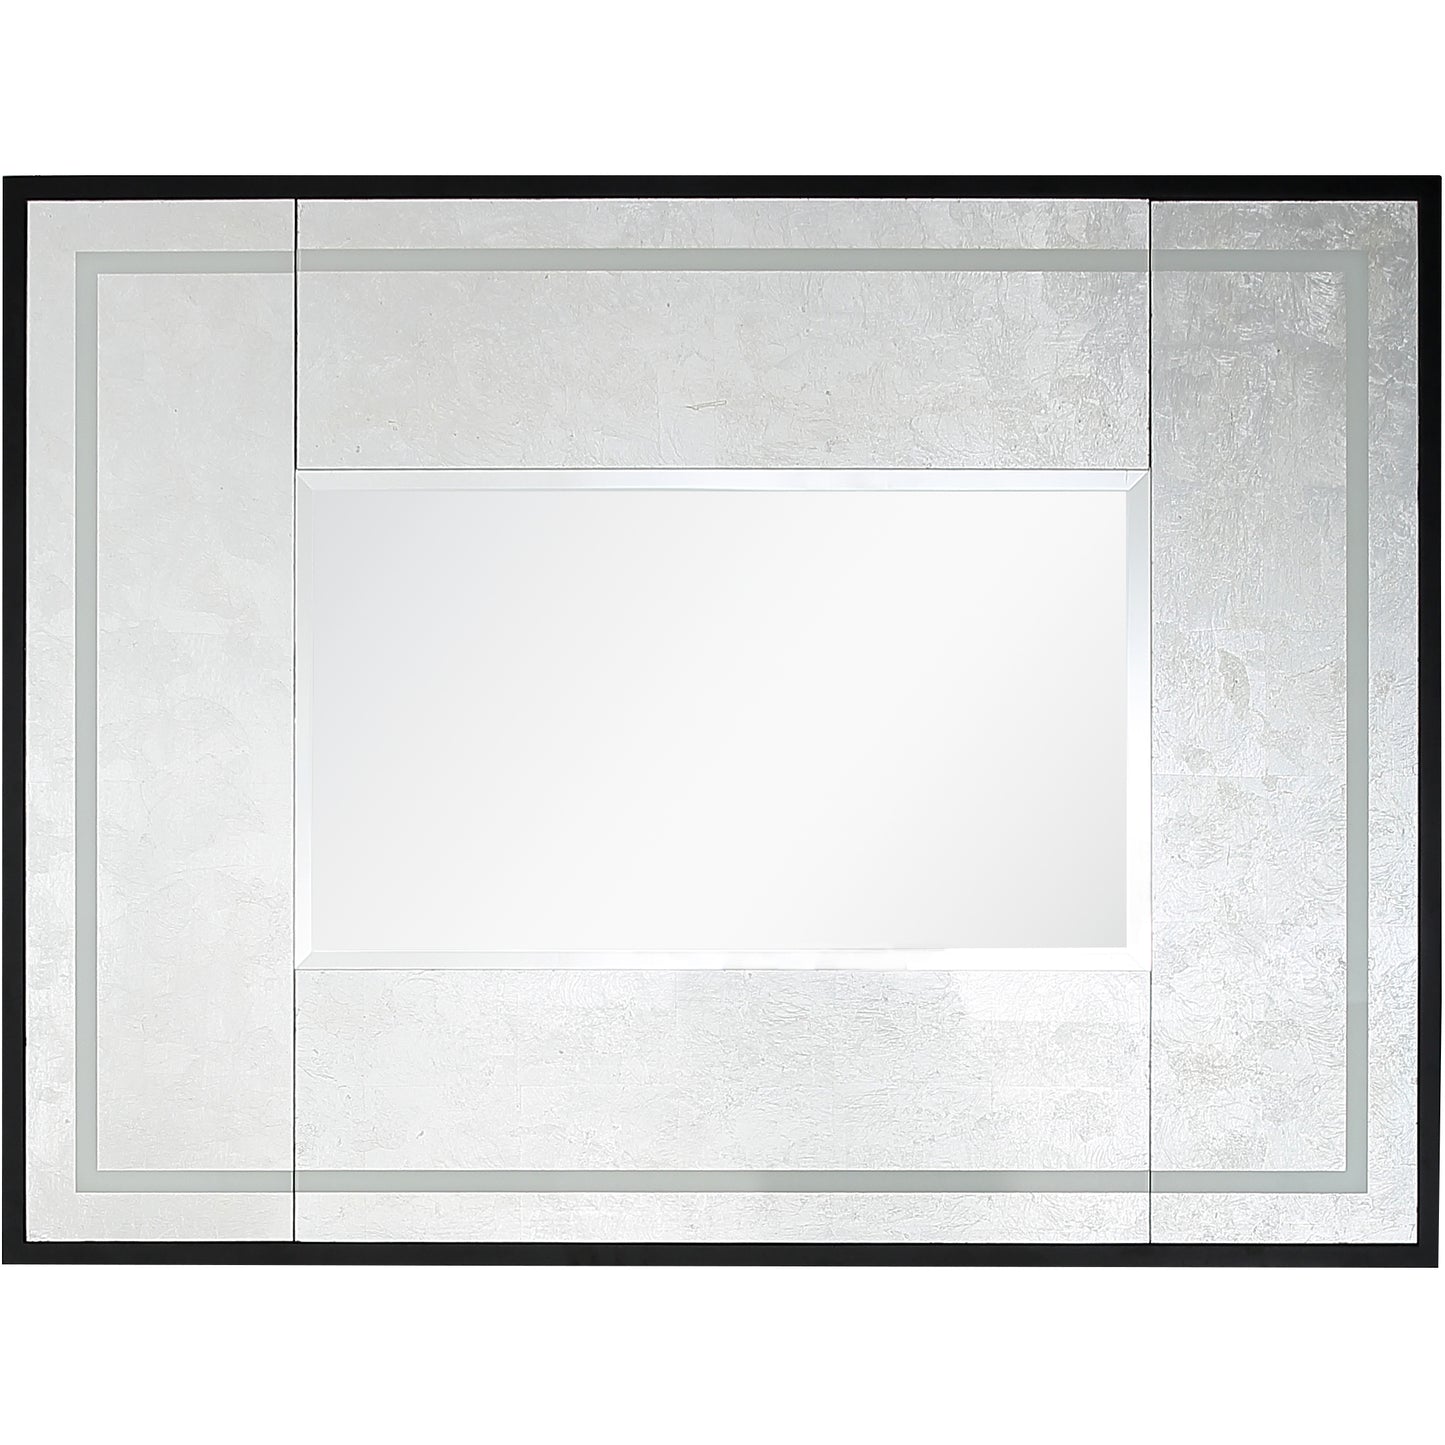 Makalu Wall Mirror and Console Table